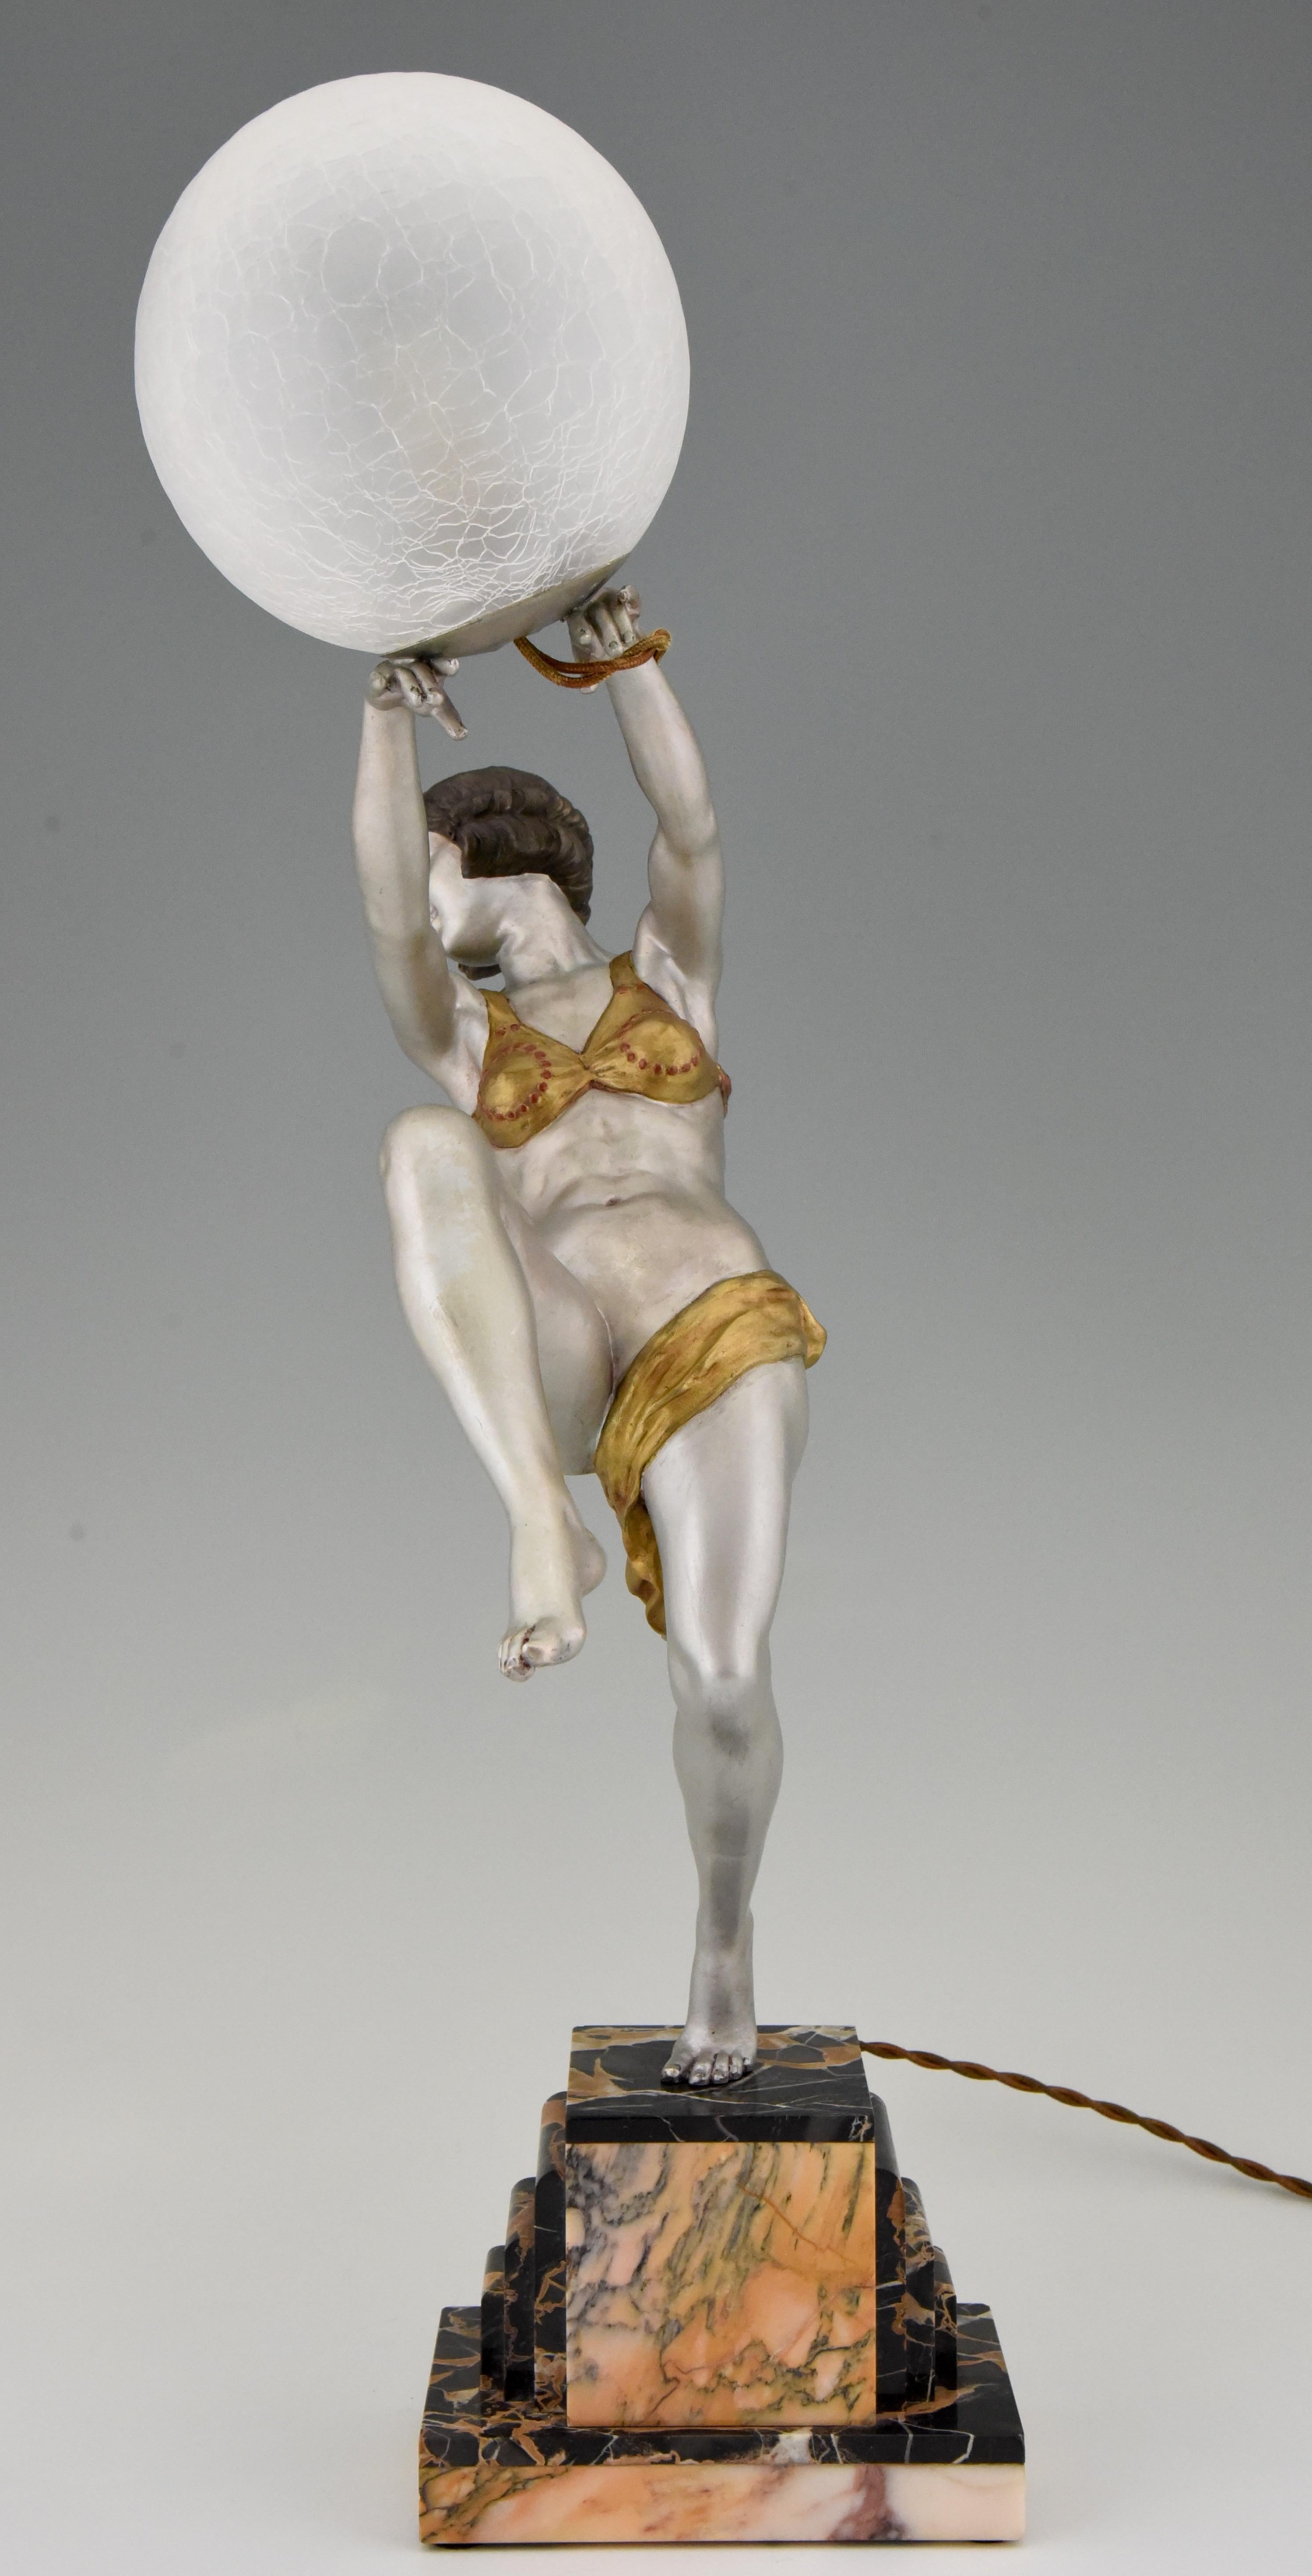 20th Century Art Deco Lamp Dancing Nude Lady Holding a Glass Ball Emile Carlier, France, 1930